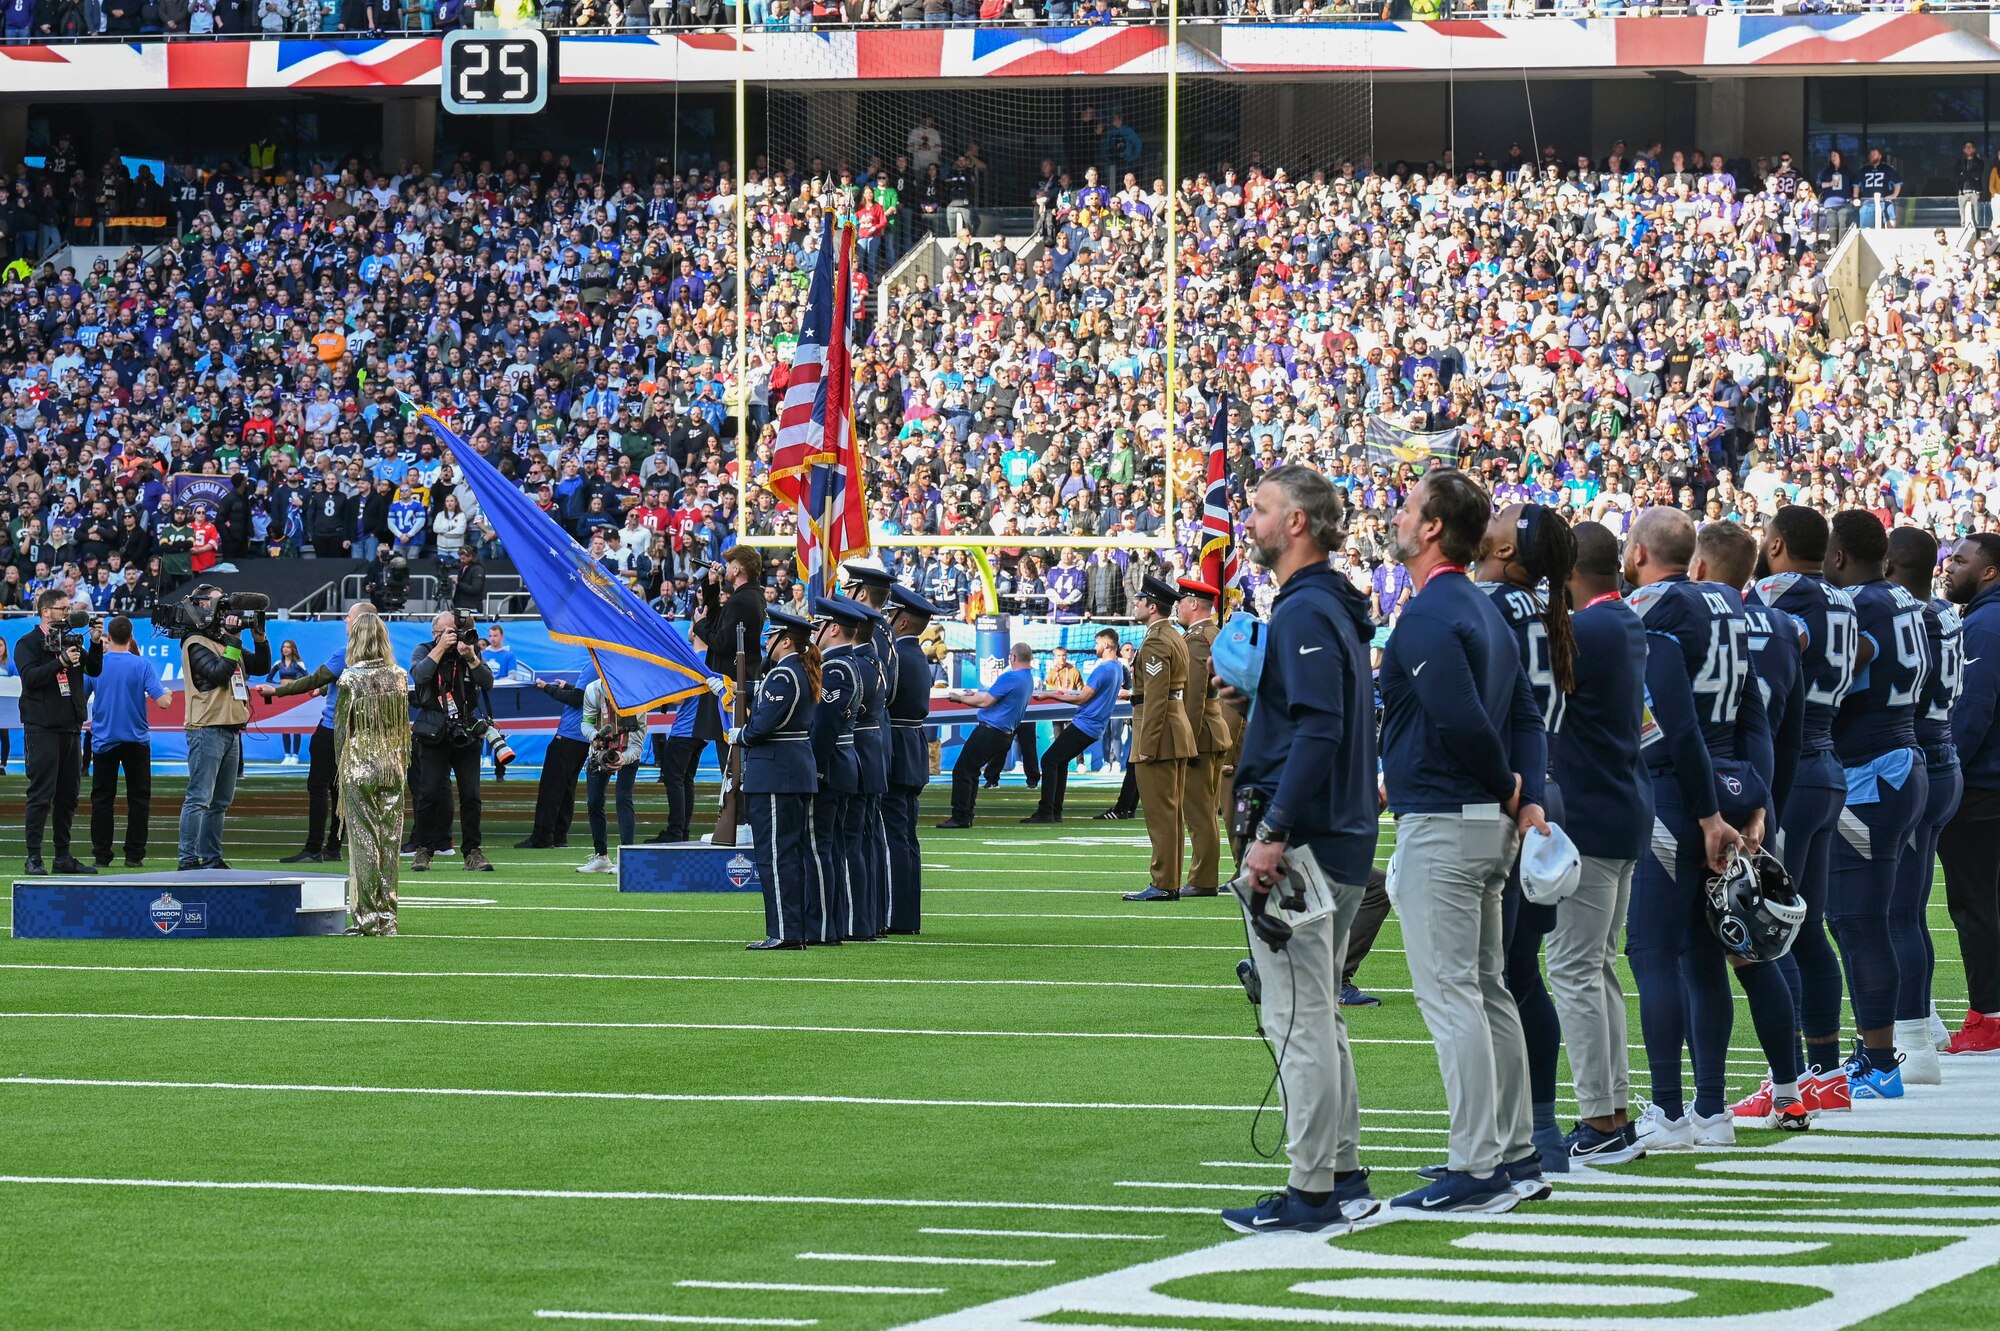 The pre-game ceremony featured more than 40 Royal Air Force Mildenhall Airmen unfurling the flag along with the RAF Lakenheath Honor Guard.